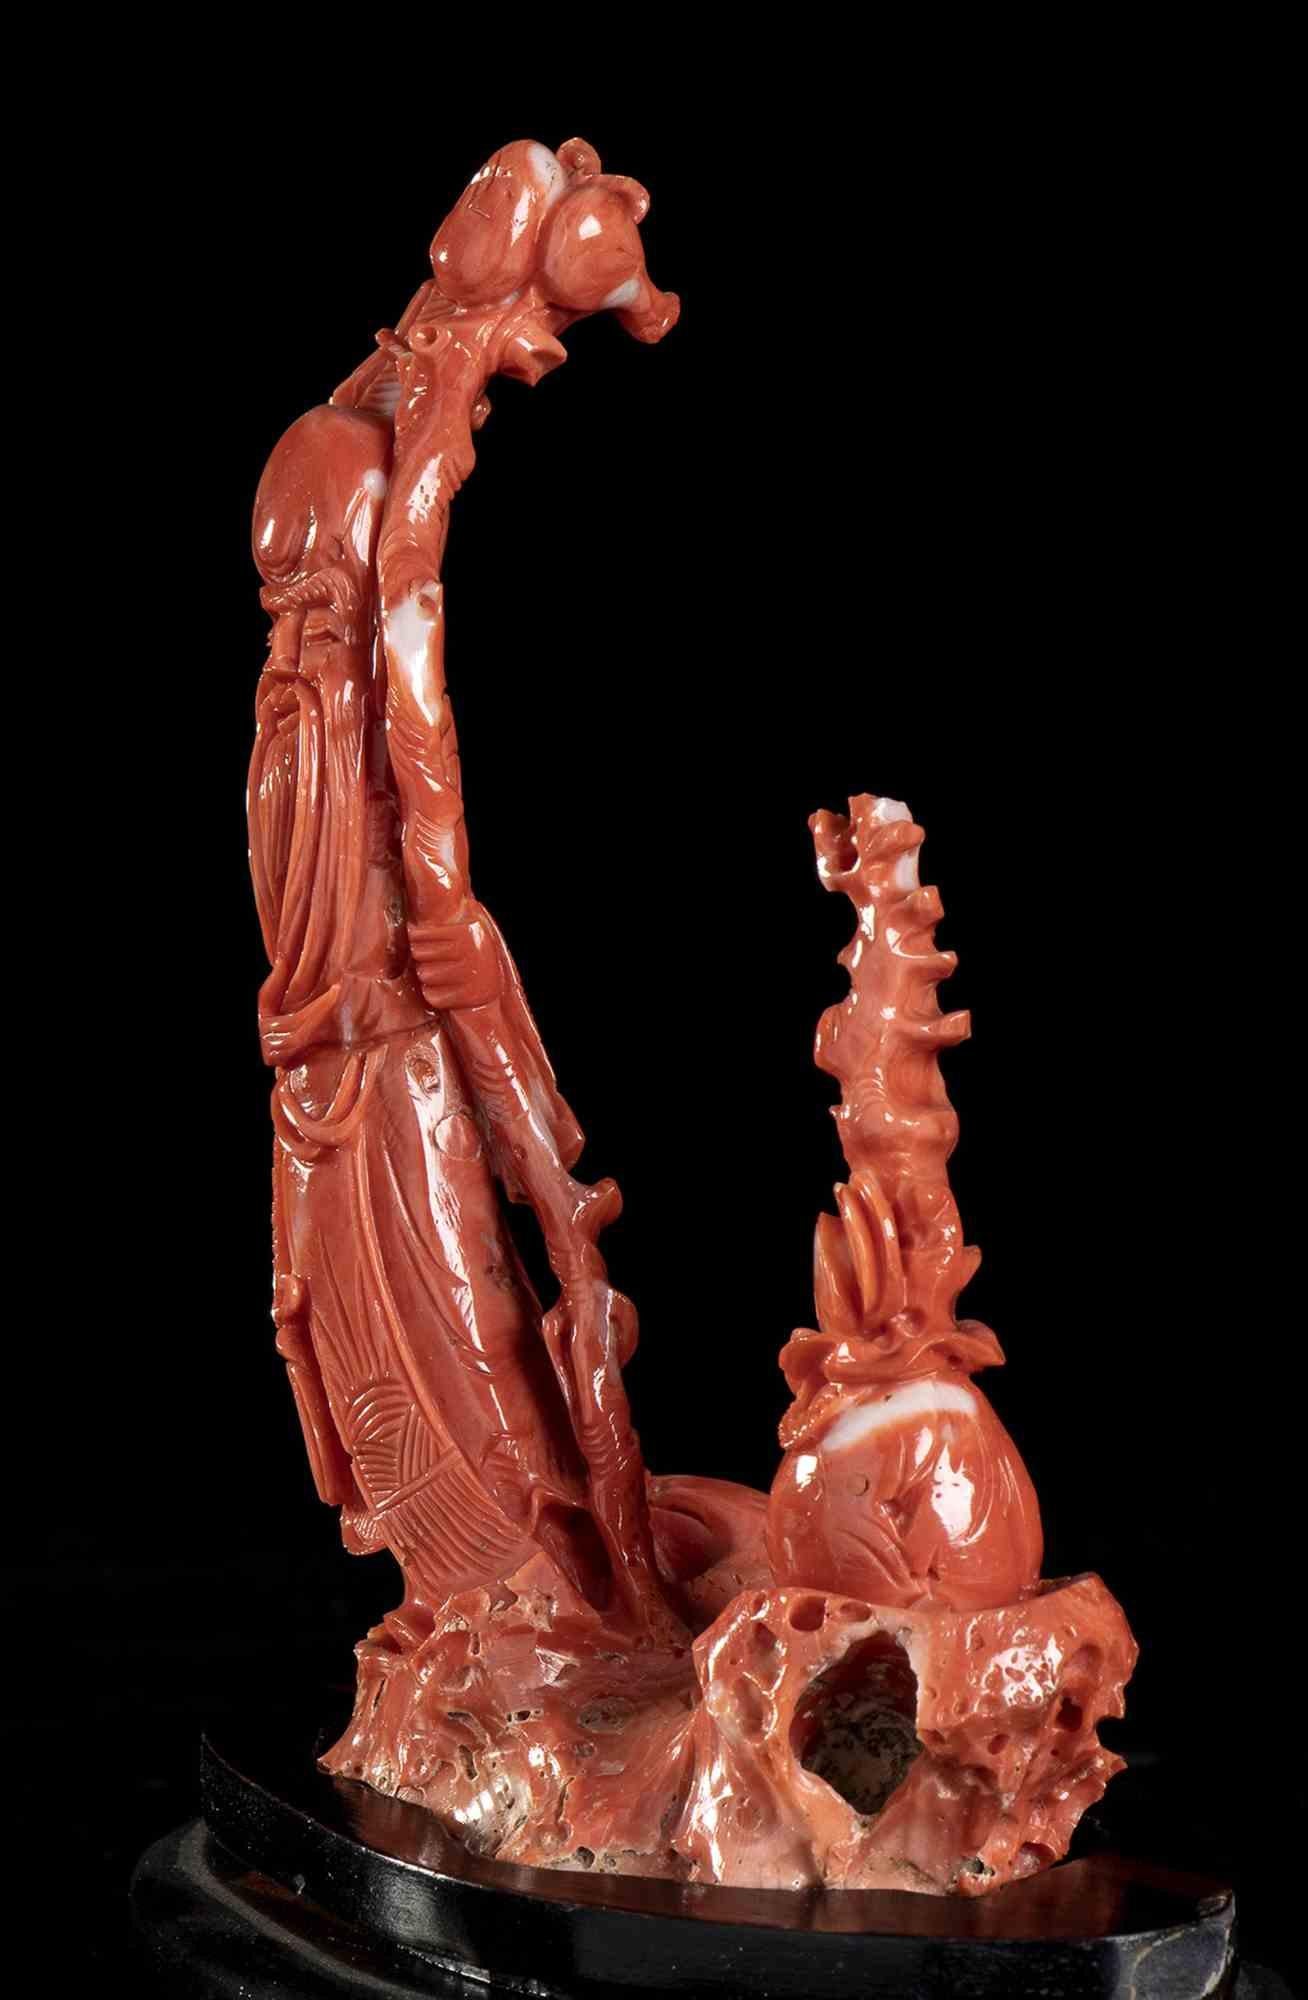 Cerasuolo coral carving (corallium elatius)

Coral carving depicting Shoulao, the God of Longevity, represented with his typical large cranium, the right hand holding a walking stick, a peach in the left hand as a symbol of long life. Wooden base.